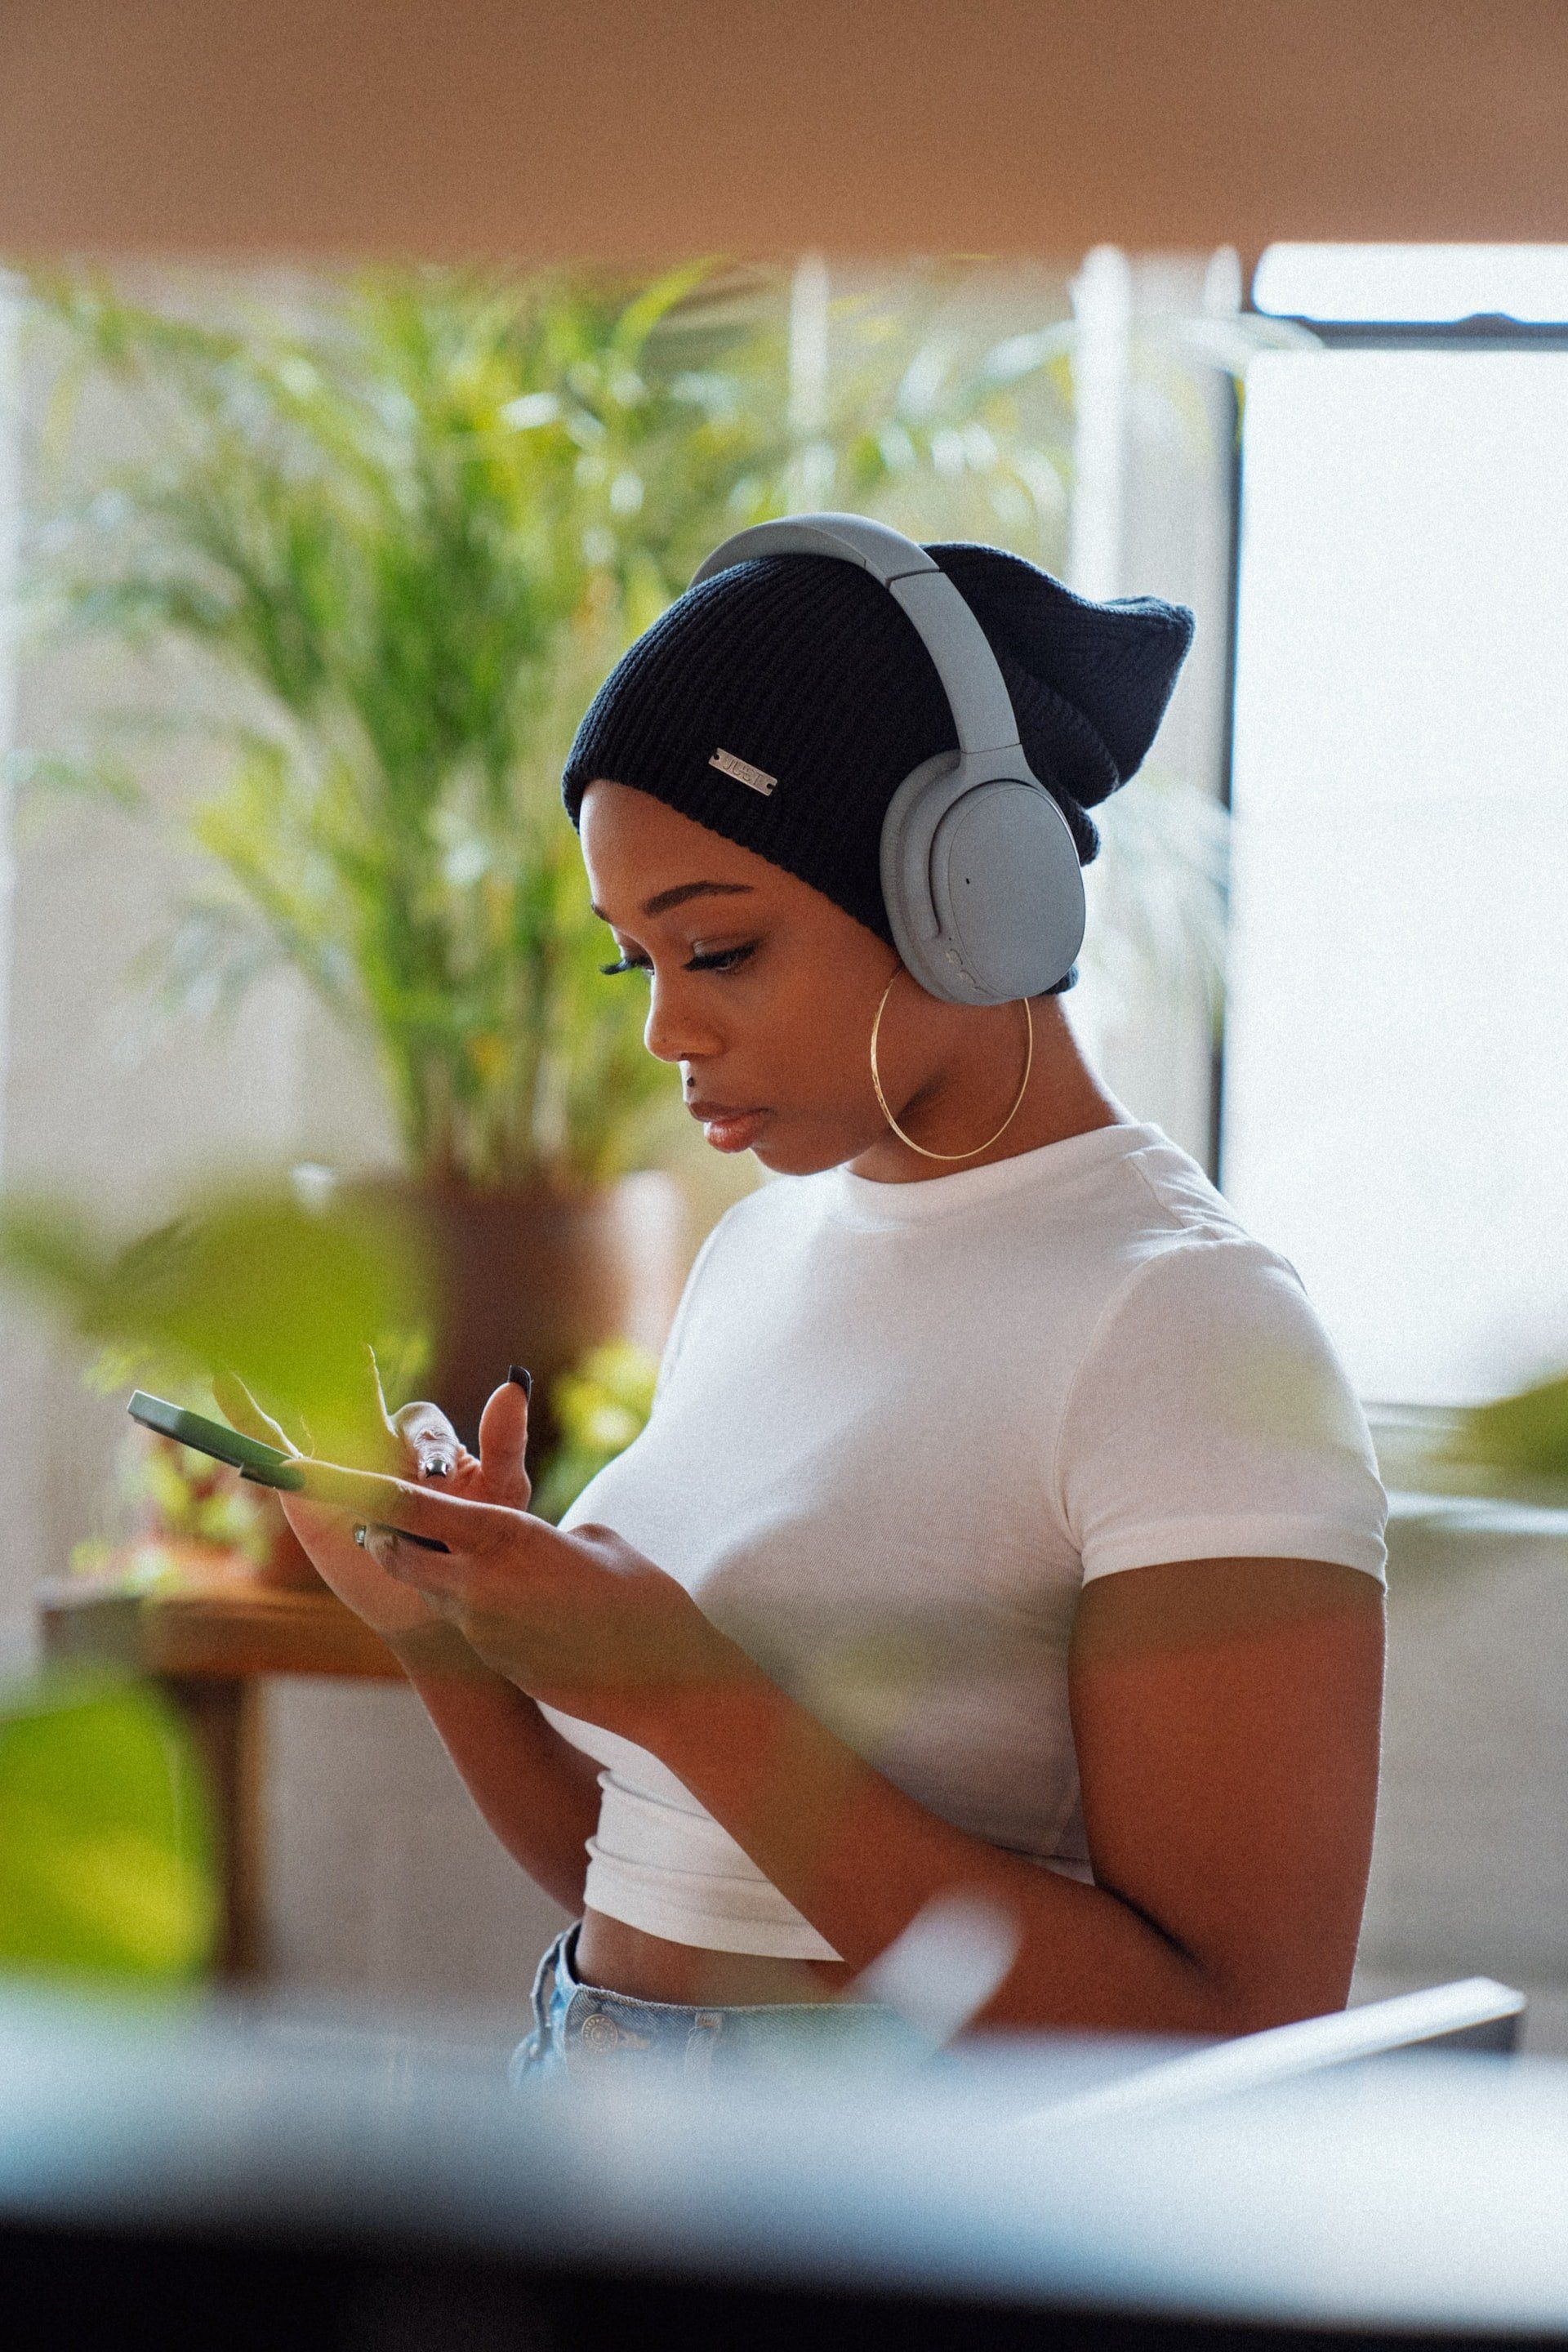 A woman wearing headphones is looking at her phone.